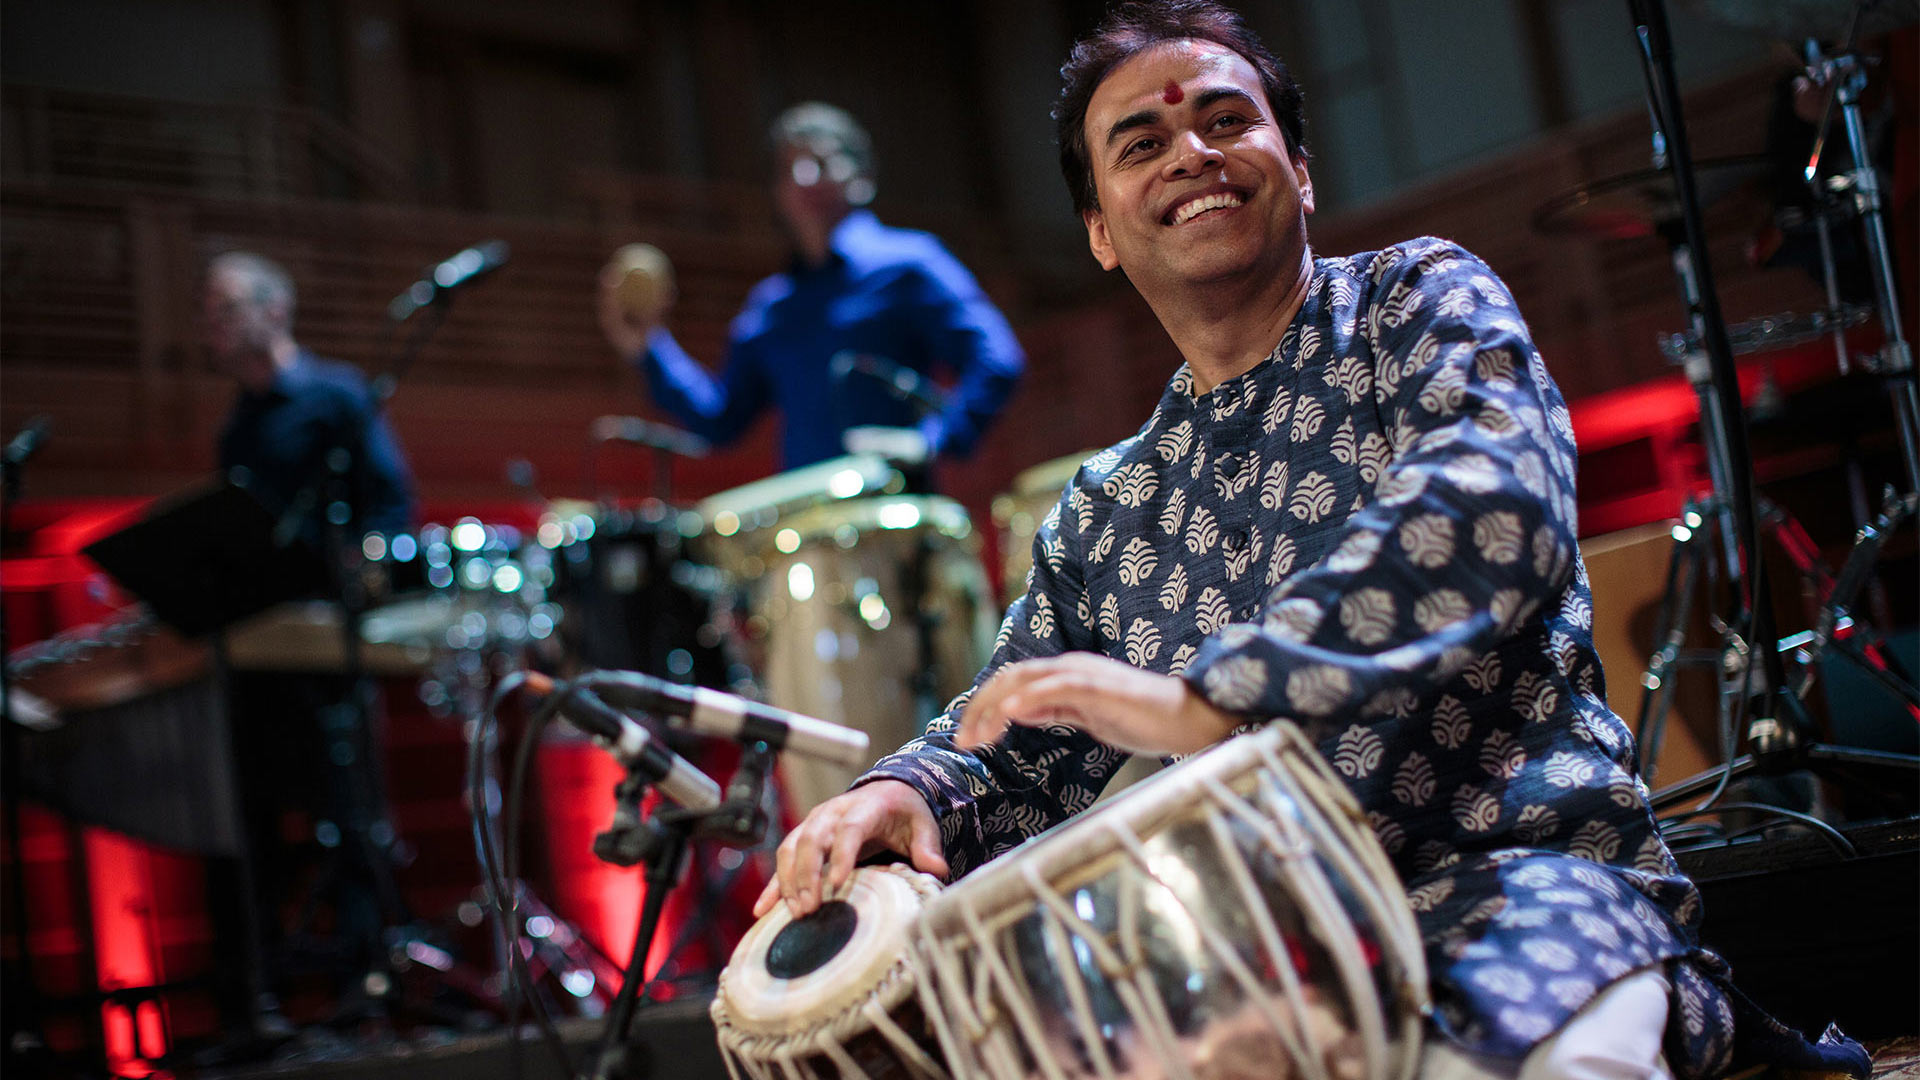 Sandeep Das on stage playing the tabla, a set of traditional Indian drums.